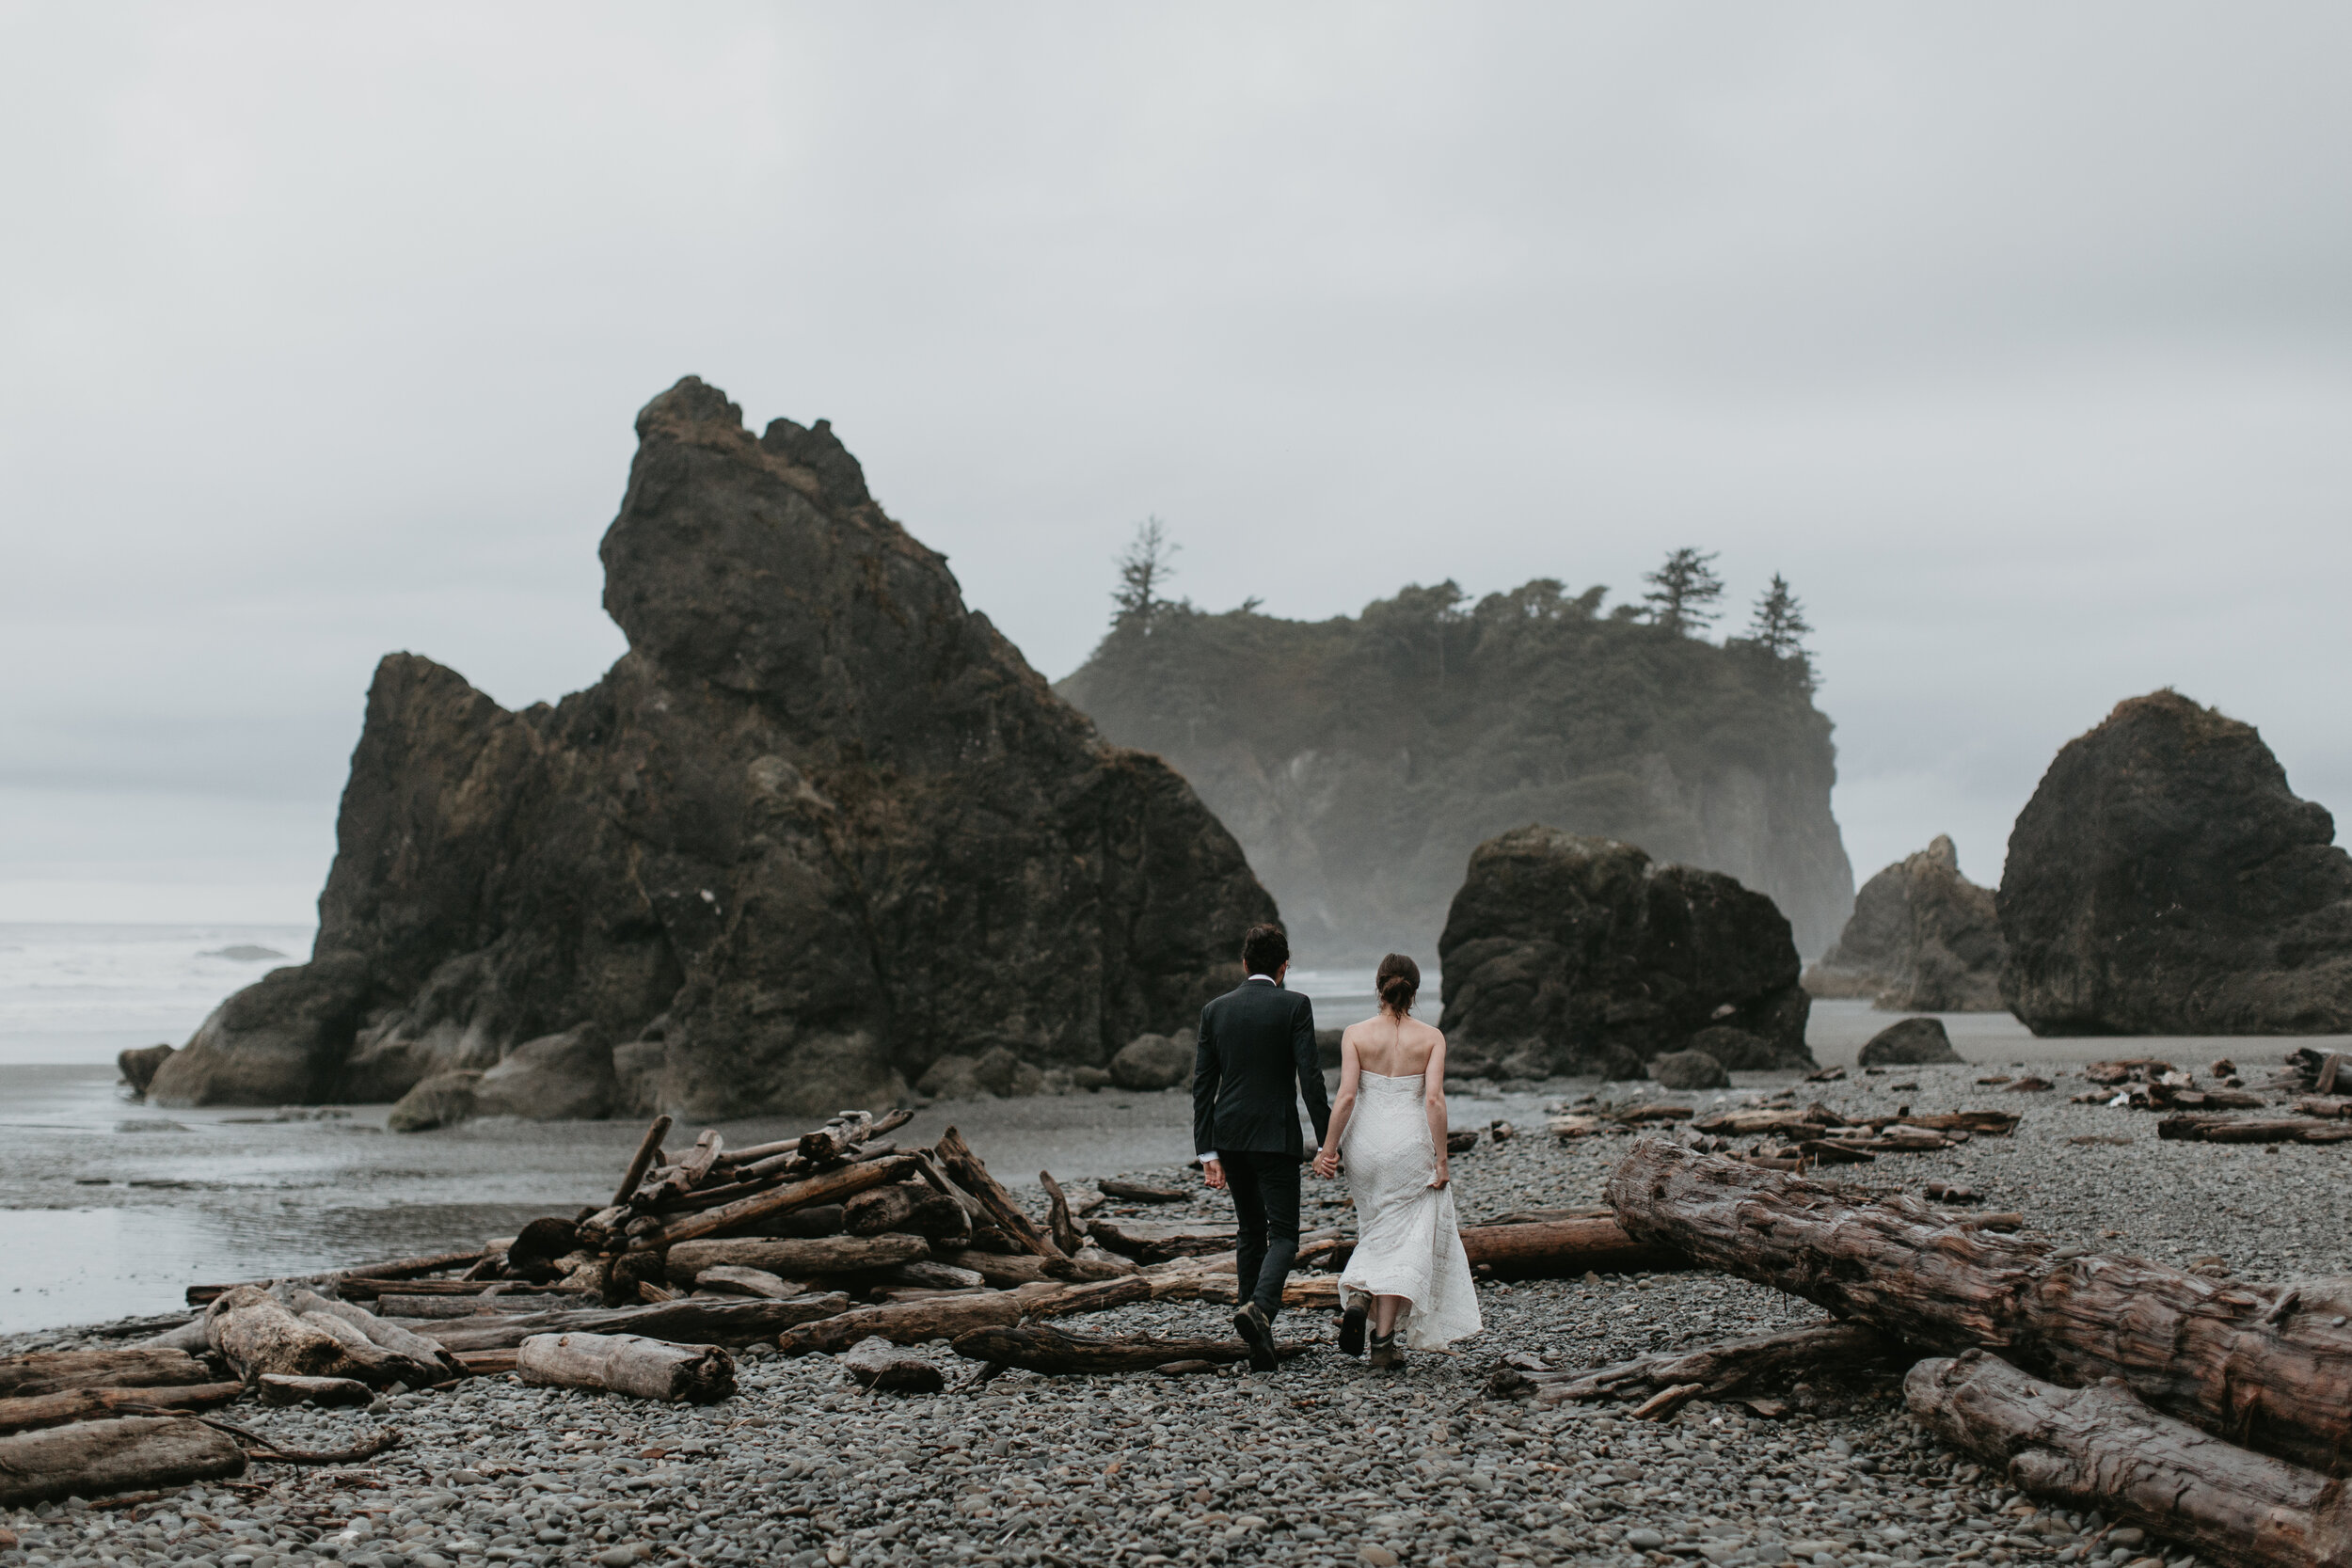 Nicole-Daacke-Photography-Olympic-national-park-elopement-photography-intimiate-elopement-in-olympic-peninsula-washington-state-rainy-day-ruby-beach-hoh-rainforest-elopement-inspiration-rainforest-pnw-elopement-photography-162.jpg